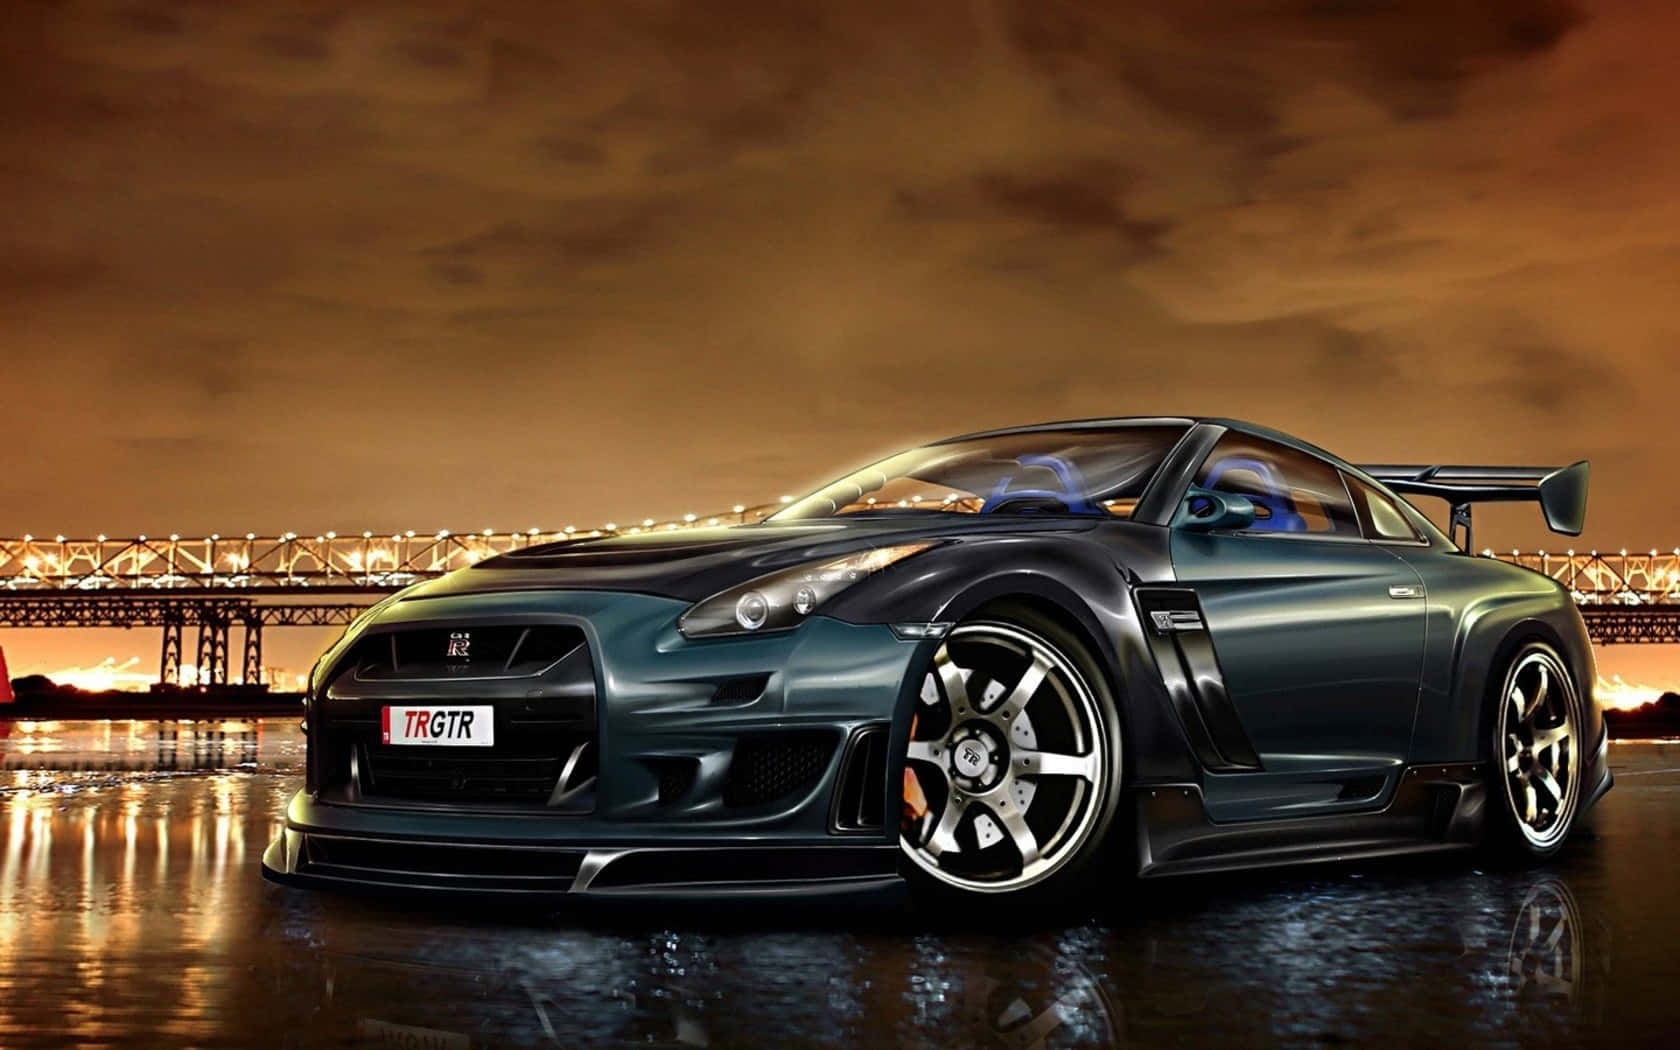 The Ultimate Driving Machine - Nissan GTR